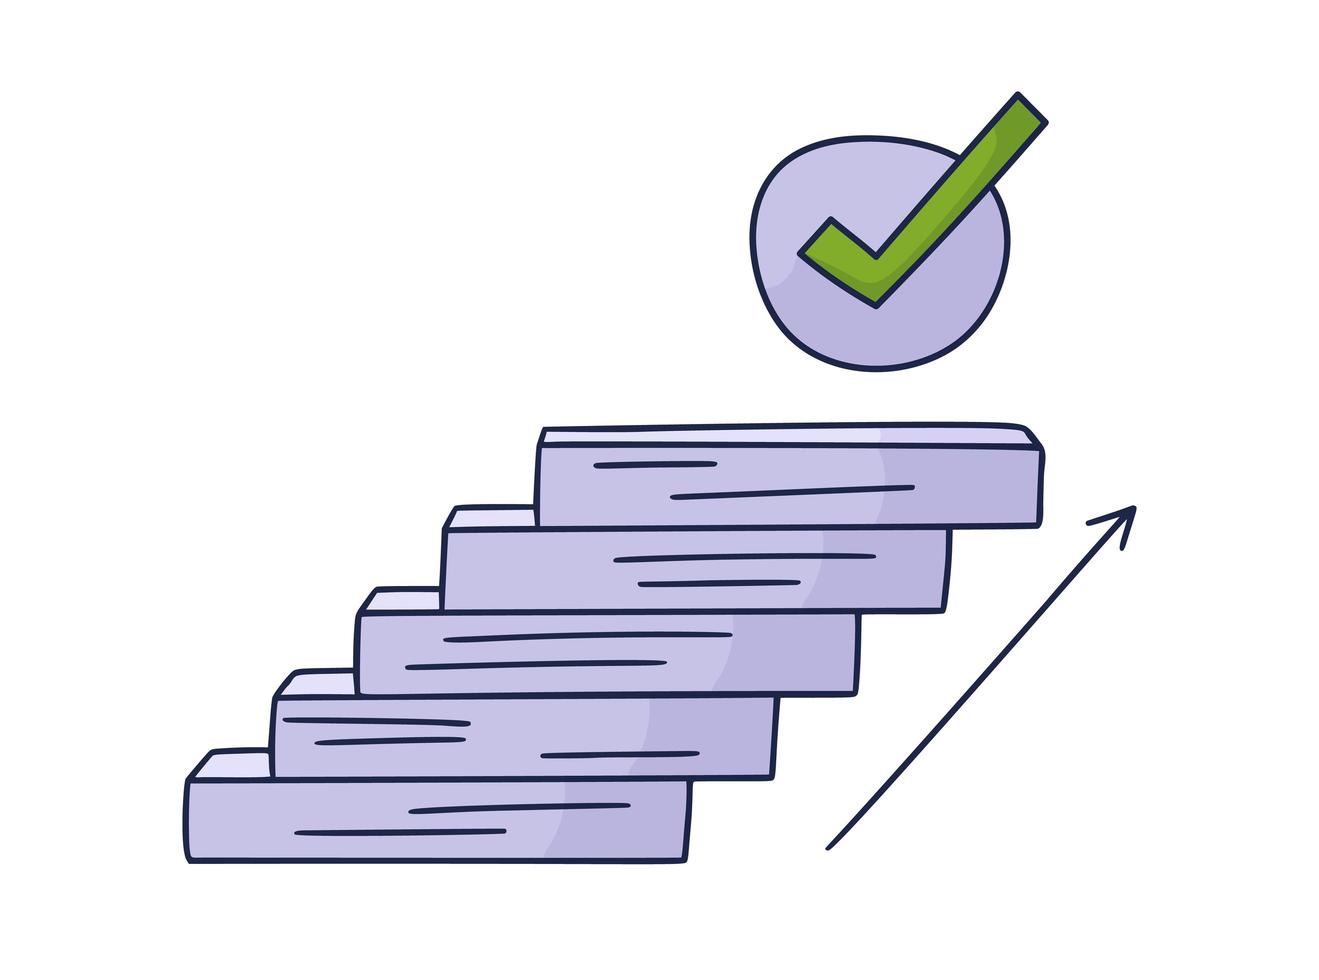 Steps up to the check mark. Vector Doodle illustration drawn by hand with steps or stairs on top of which is an icon of the approved. The path to success and achieving goals